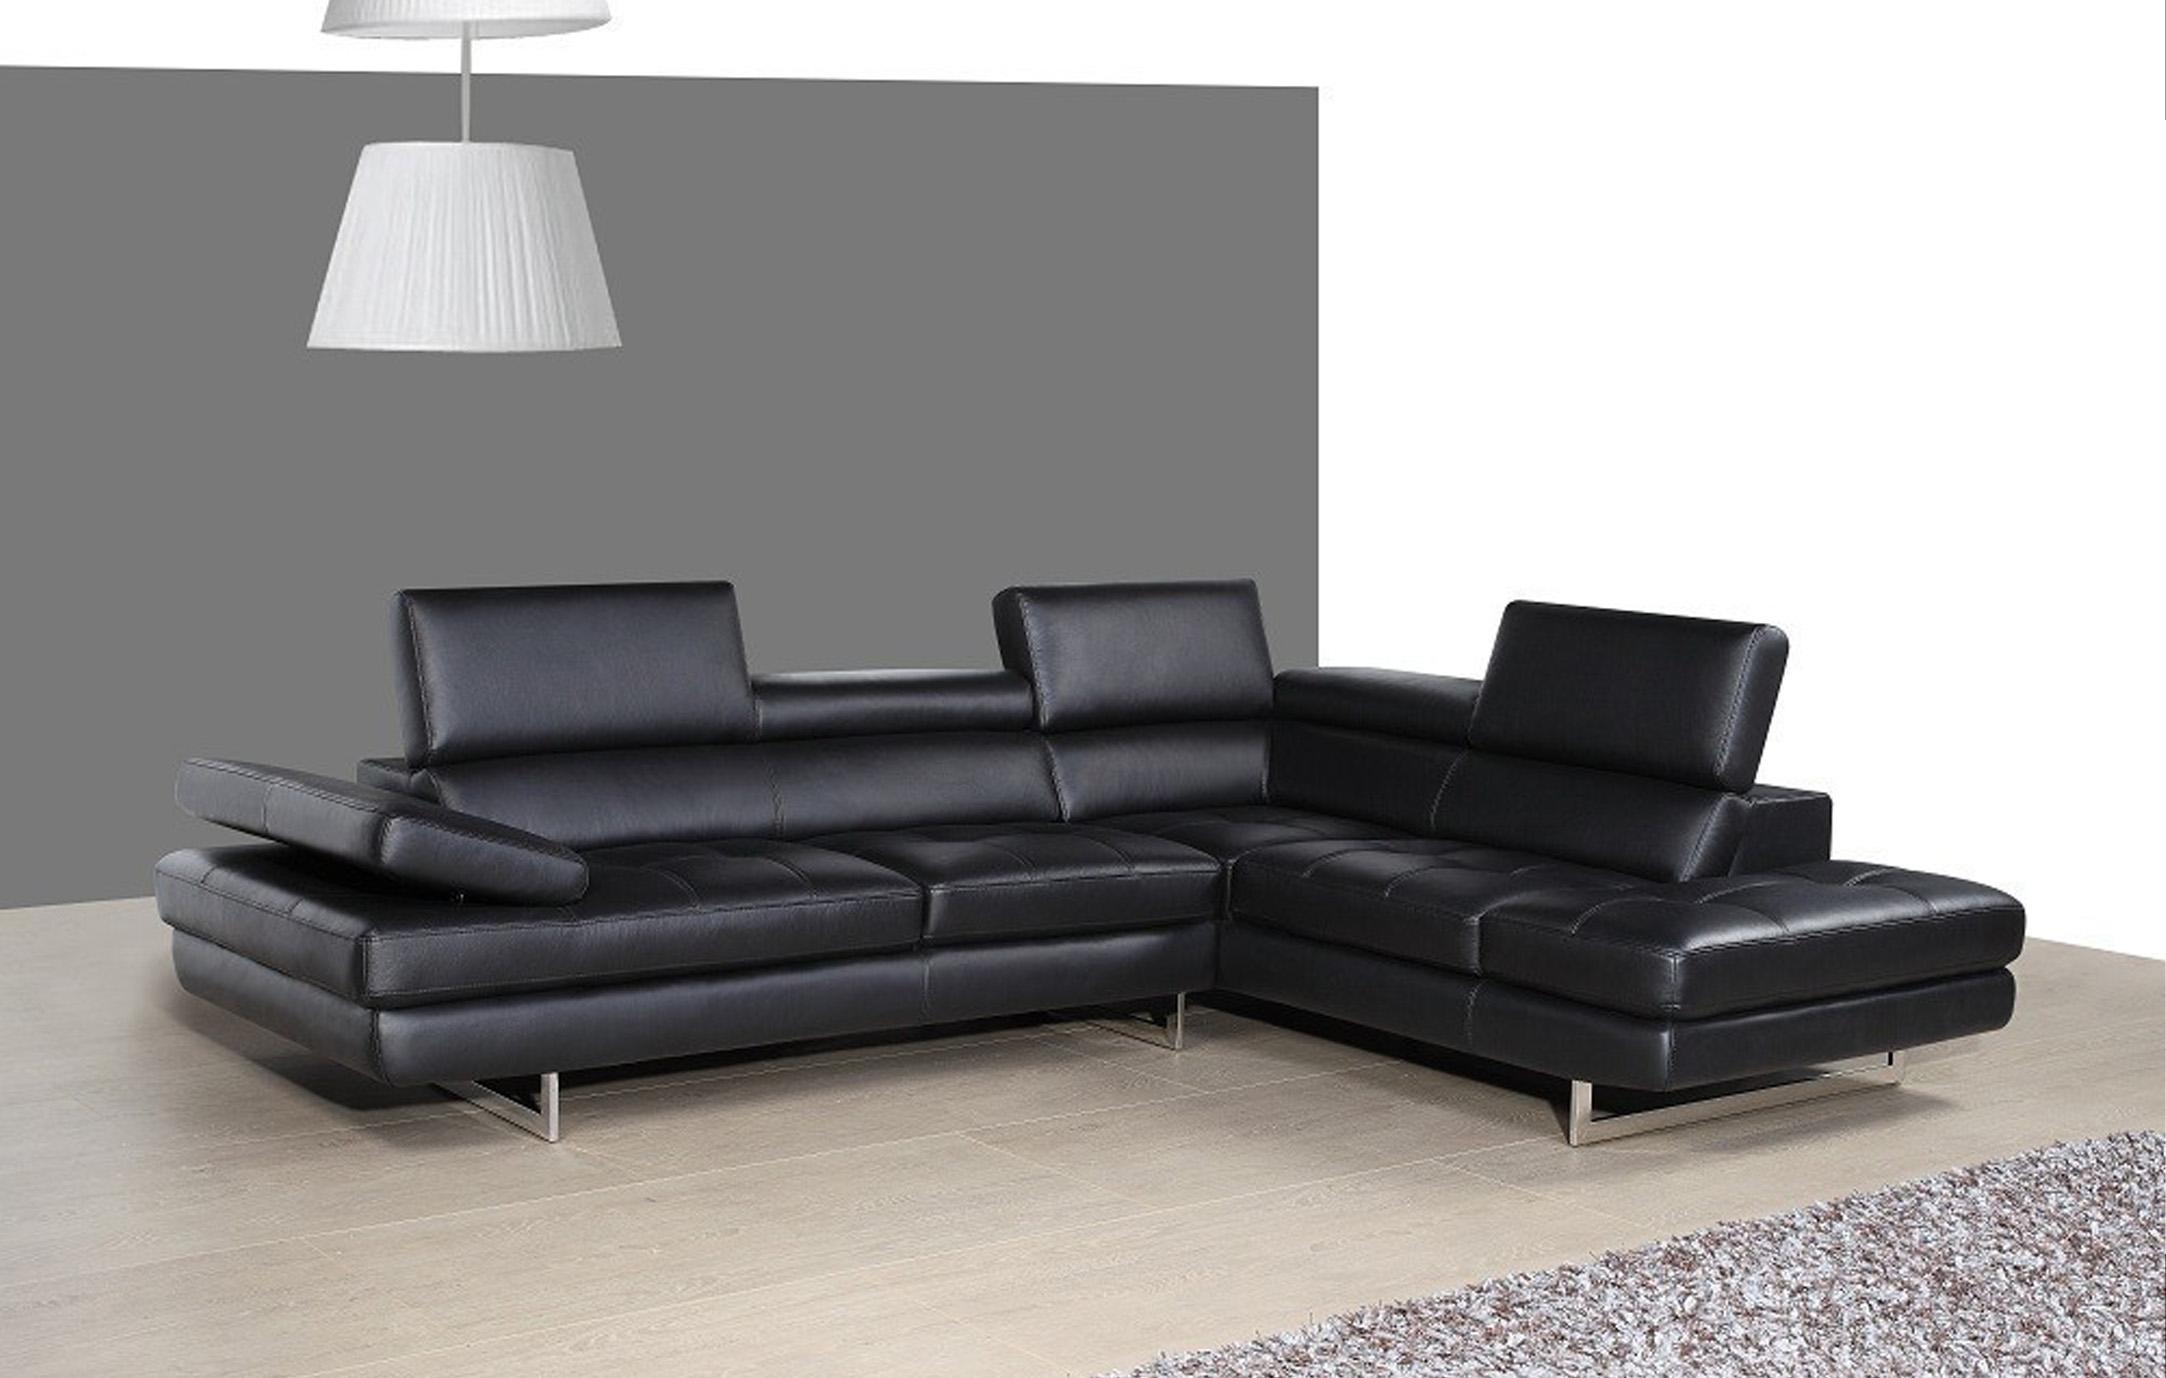 Contemporary Sectional Sofa A761 SKU1785521 in Black Italian Leather